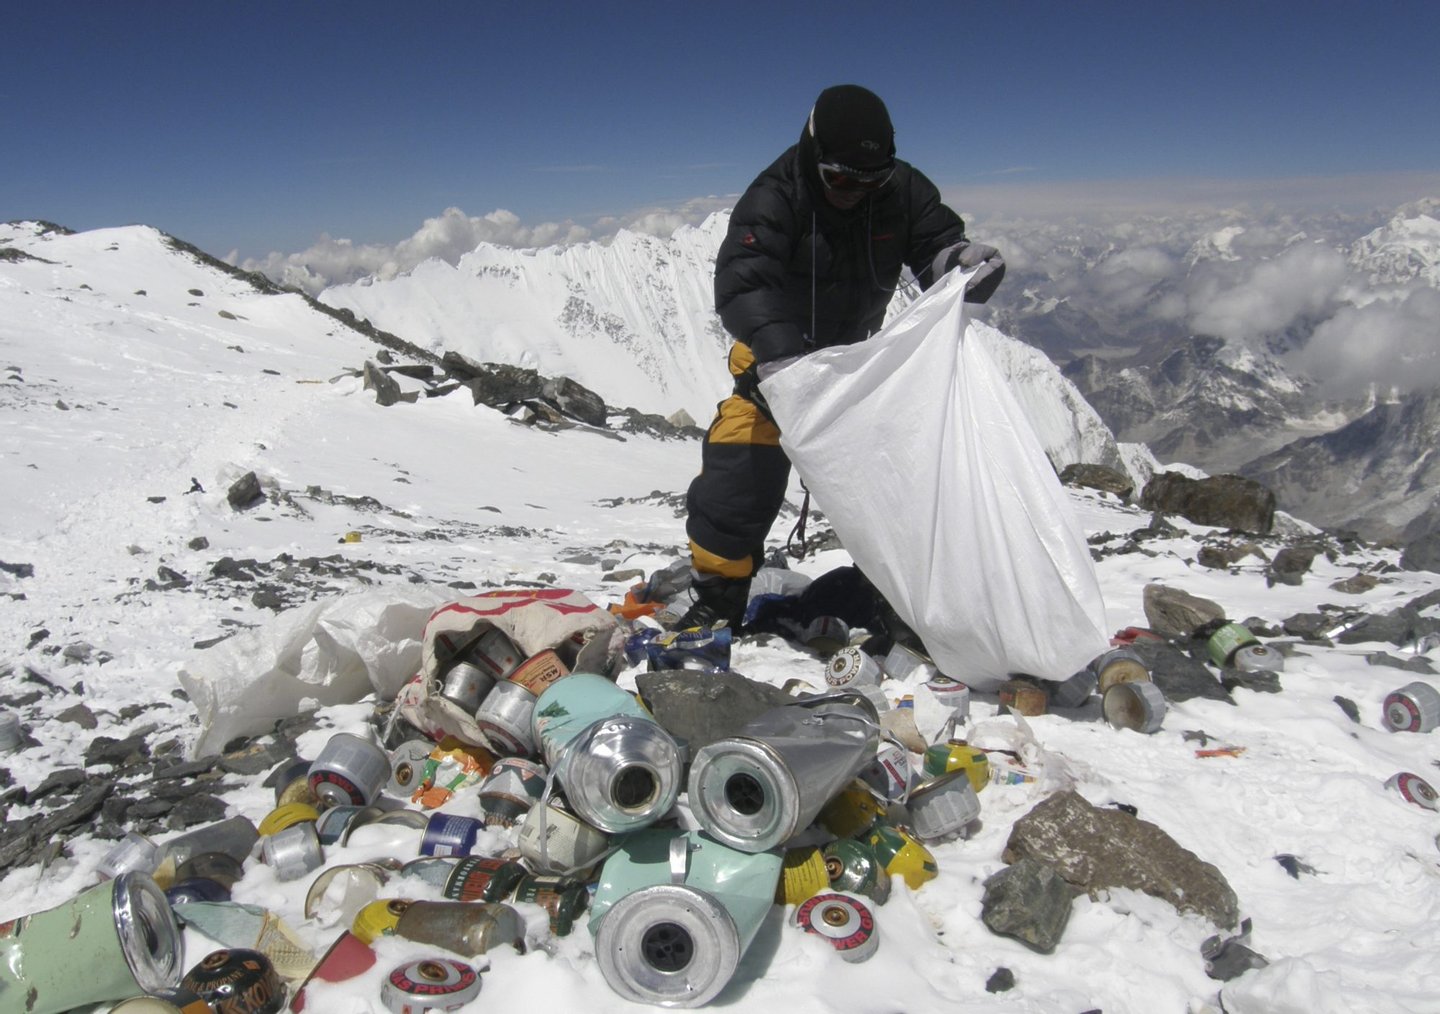 This picture taken on May 23, 2010 shows a Nepalese sherpa collecting garbage, left by climbers, at an altitude of 8,000 metres during the Everest clean-up expedition at Mount Everest. A group of 20 Nepalese climbers, including some top summiteers collected 1,800 kilograms of garbage in a high-risk expedition to clean up the world's highest peak. Led by seven-time summiteer Namgyal Sherpa, the team braved thin air and below freezing temperatures to clear around two tonnes of rubbish left behind by mountaineers, that included empty oxygen cylinders and corpses. Since 1953, there have been some 300 deaths on Everest. Many bodies have been brought down, but those above 8,000 metres have generally been left to the elements -- their bodies preserved by the freezing temperatures. The priority of the sherpas had been to clear rubbish just below the summit area, but coordinator Karki said large quantities of refuse was collected from 8,000 meters and below. AFP PHOTO/Namgyal SHERPA (Photo credit should read NAMGYAL SHERPA/AFP/Getty Images)